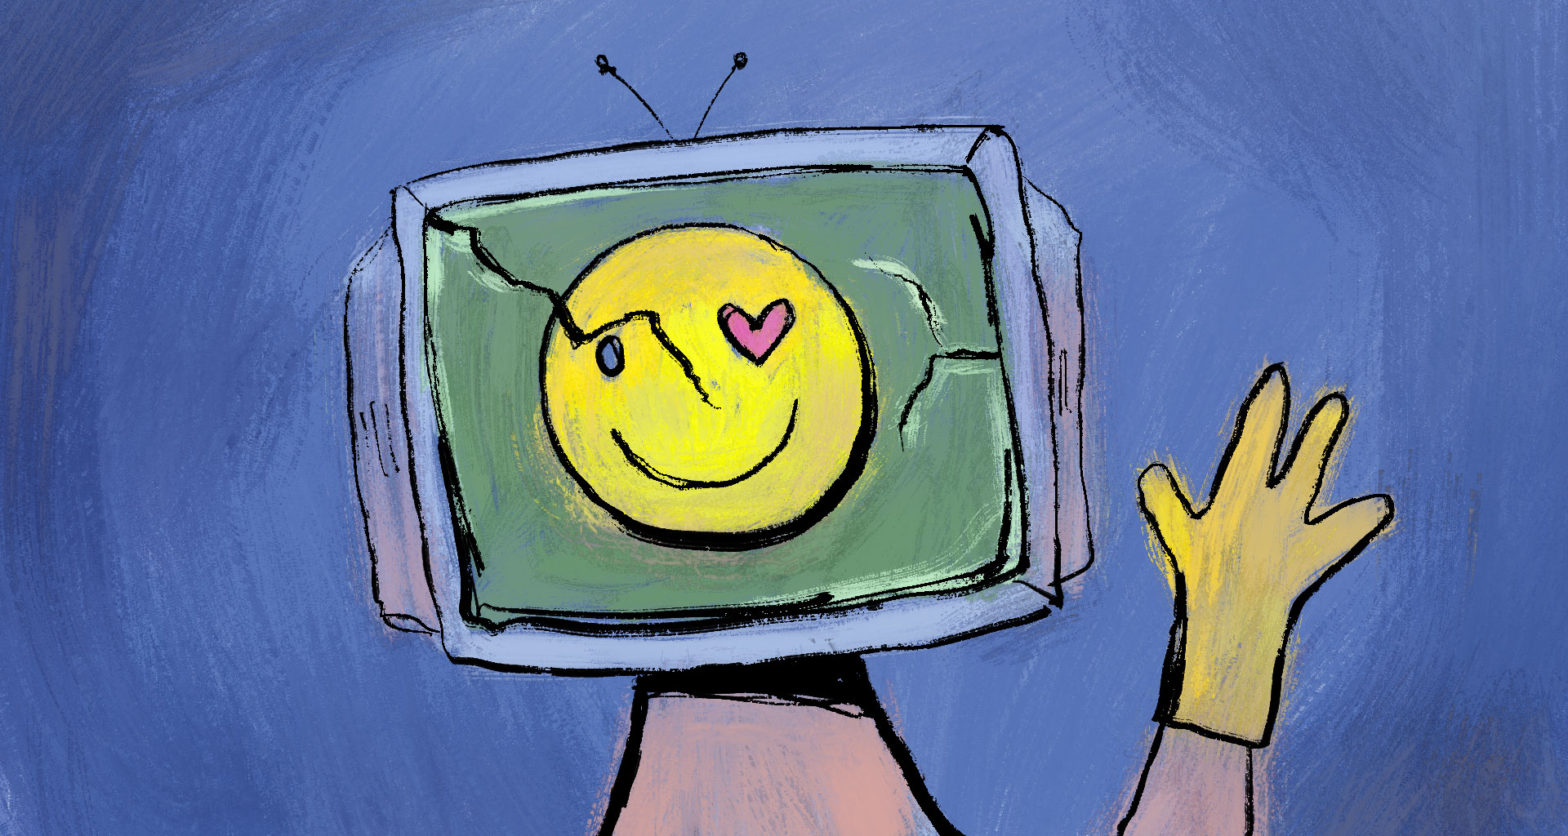 A robot with a tv for a head and a broken smiley face on the screen waving